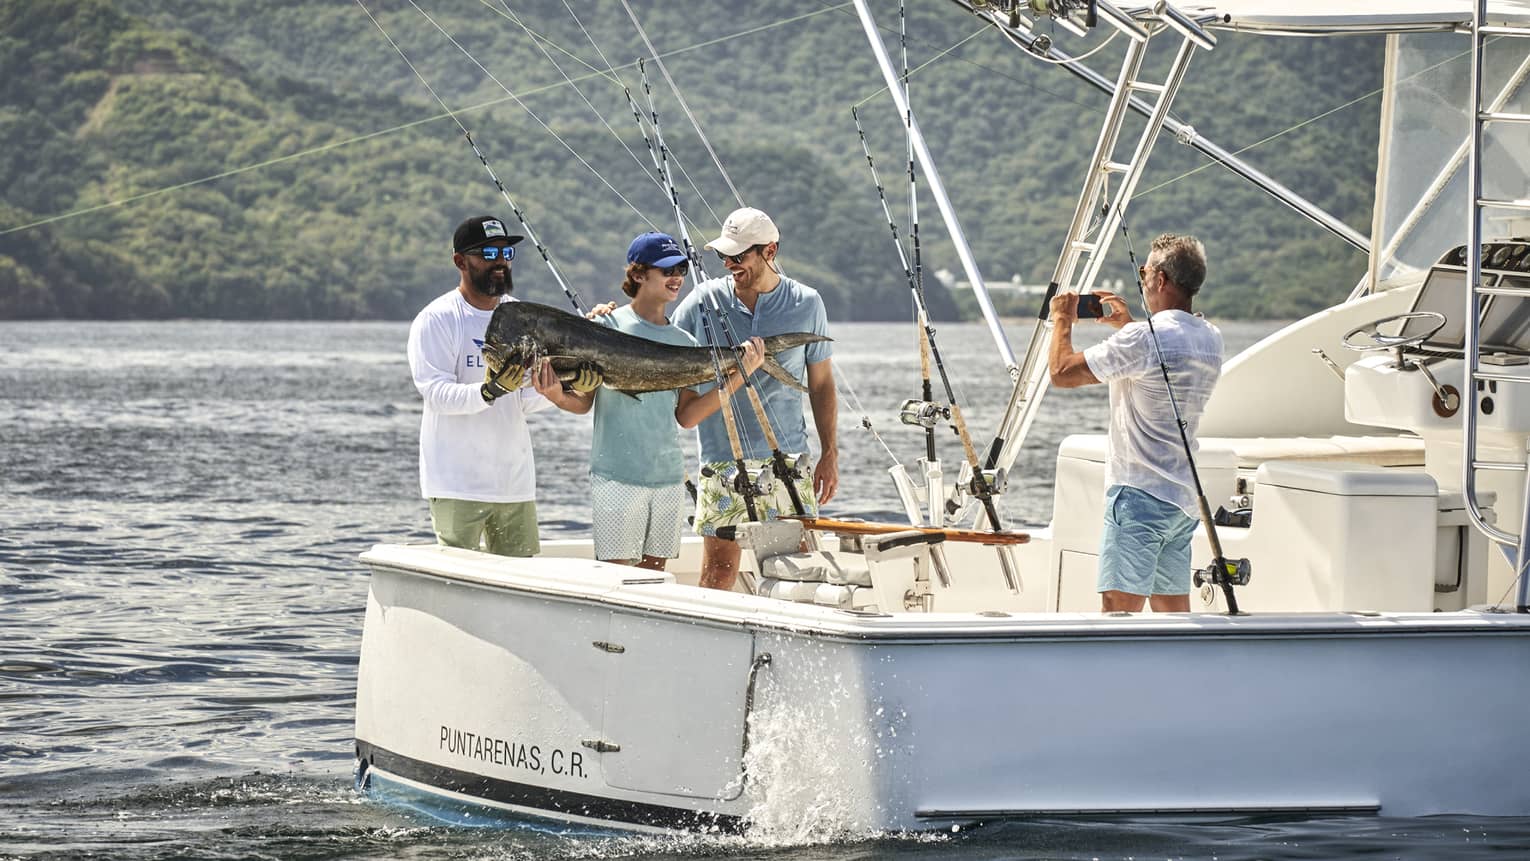 Standing at the back of a fishing boat in the glistening sea against a lush mountain, three smiling people hold a huge fish.